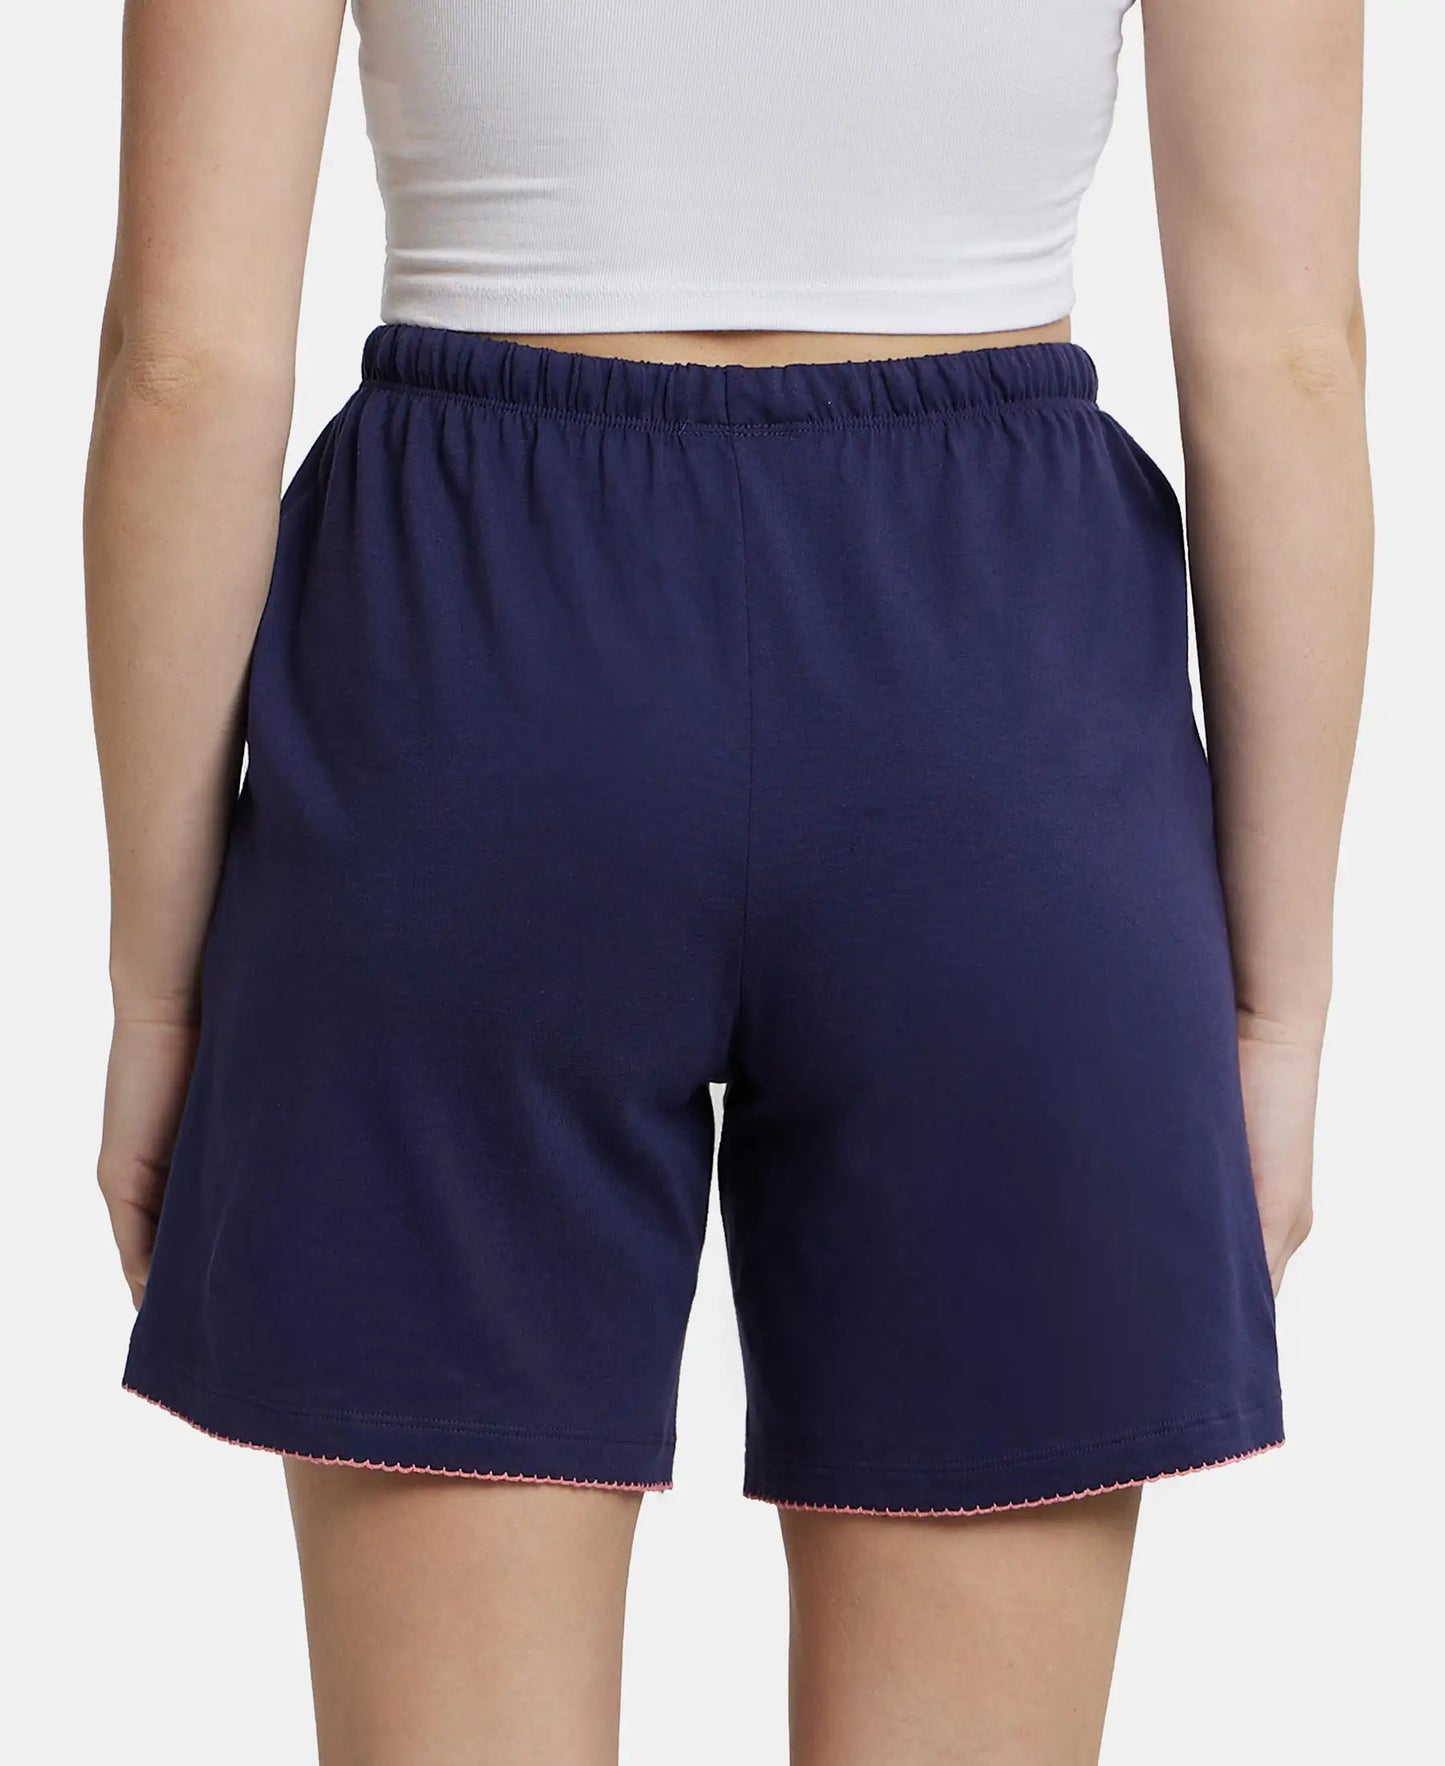 Super Combed Cotton Relaxed Fit Sleep Shorts with Convenient Side Pockets - Classic Navy-3